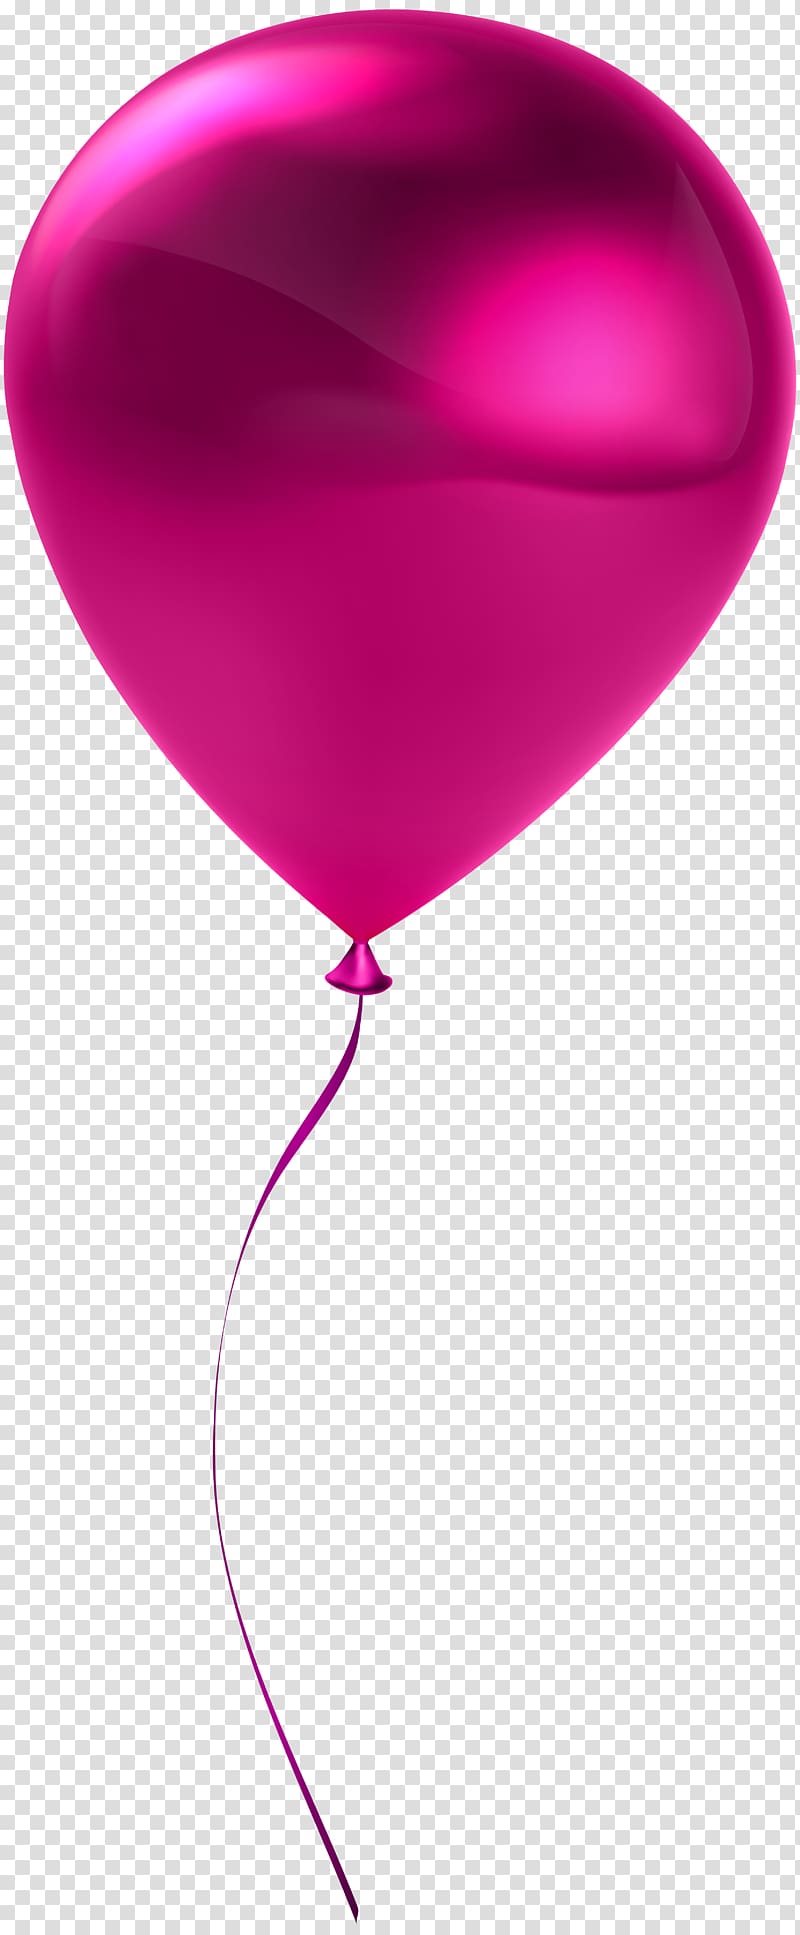 pink balloon , Red Heart Balloon, Single Pink Balloon transparent background PNG clipart